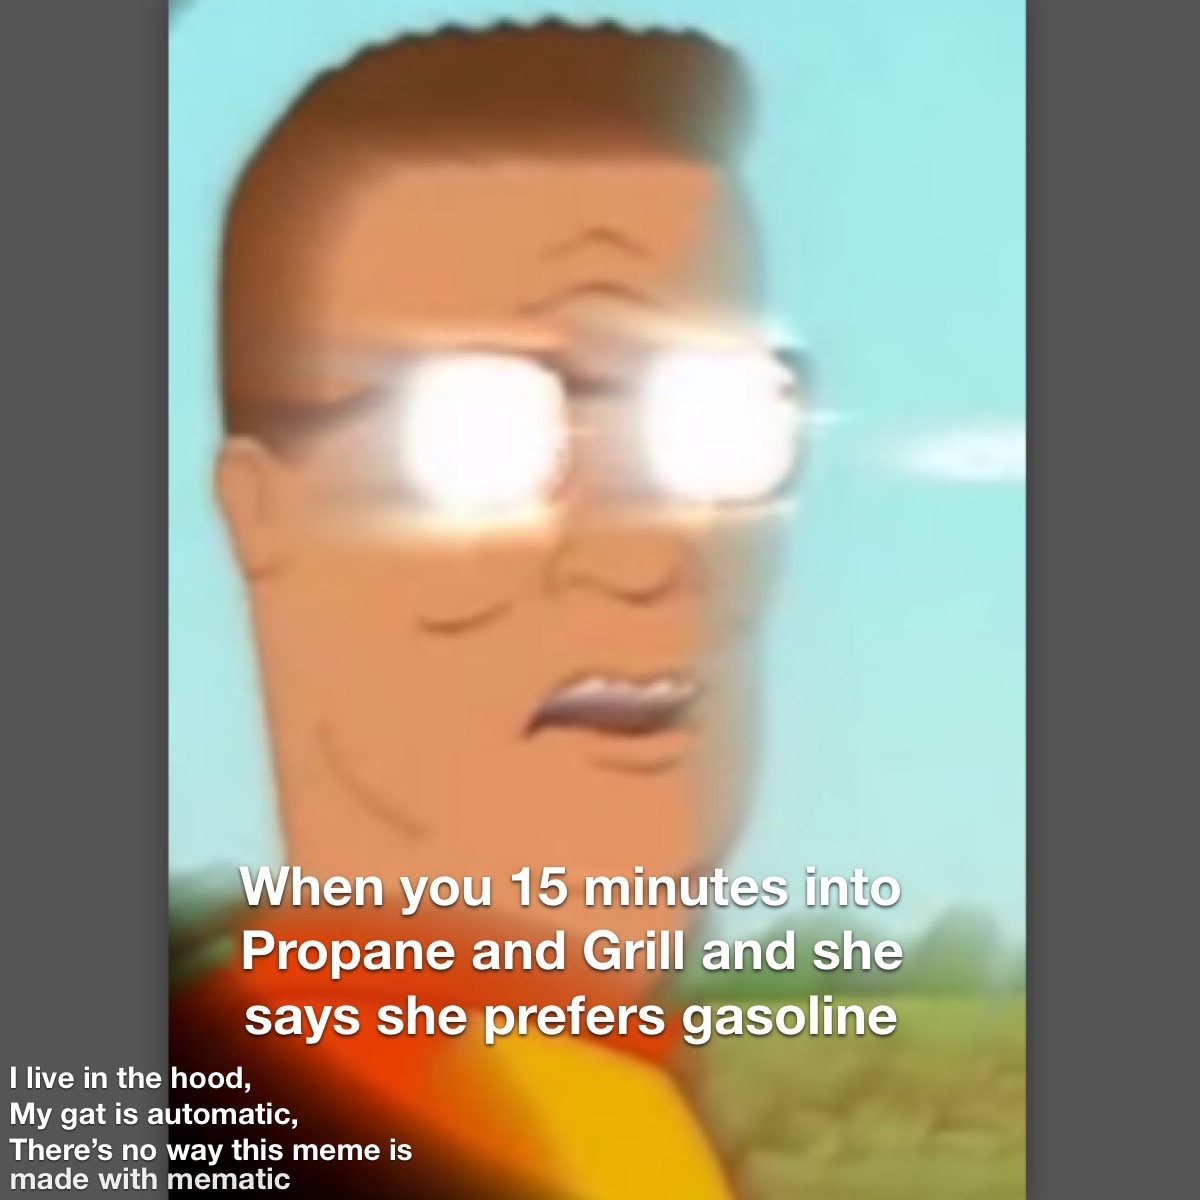 Propane and Grill 2.0 - meme